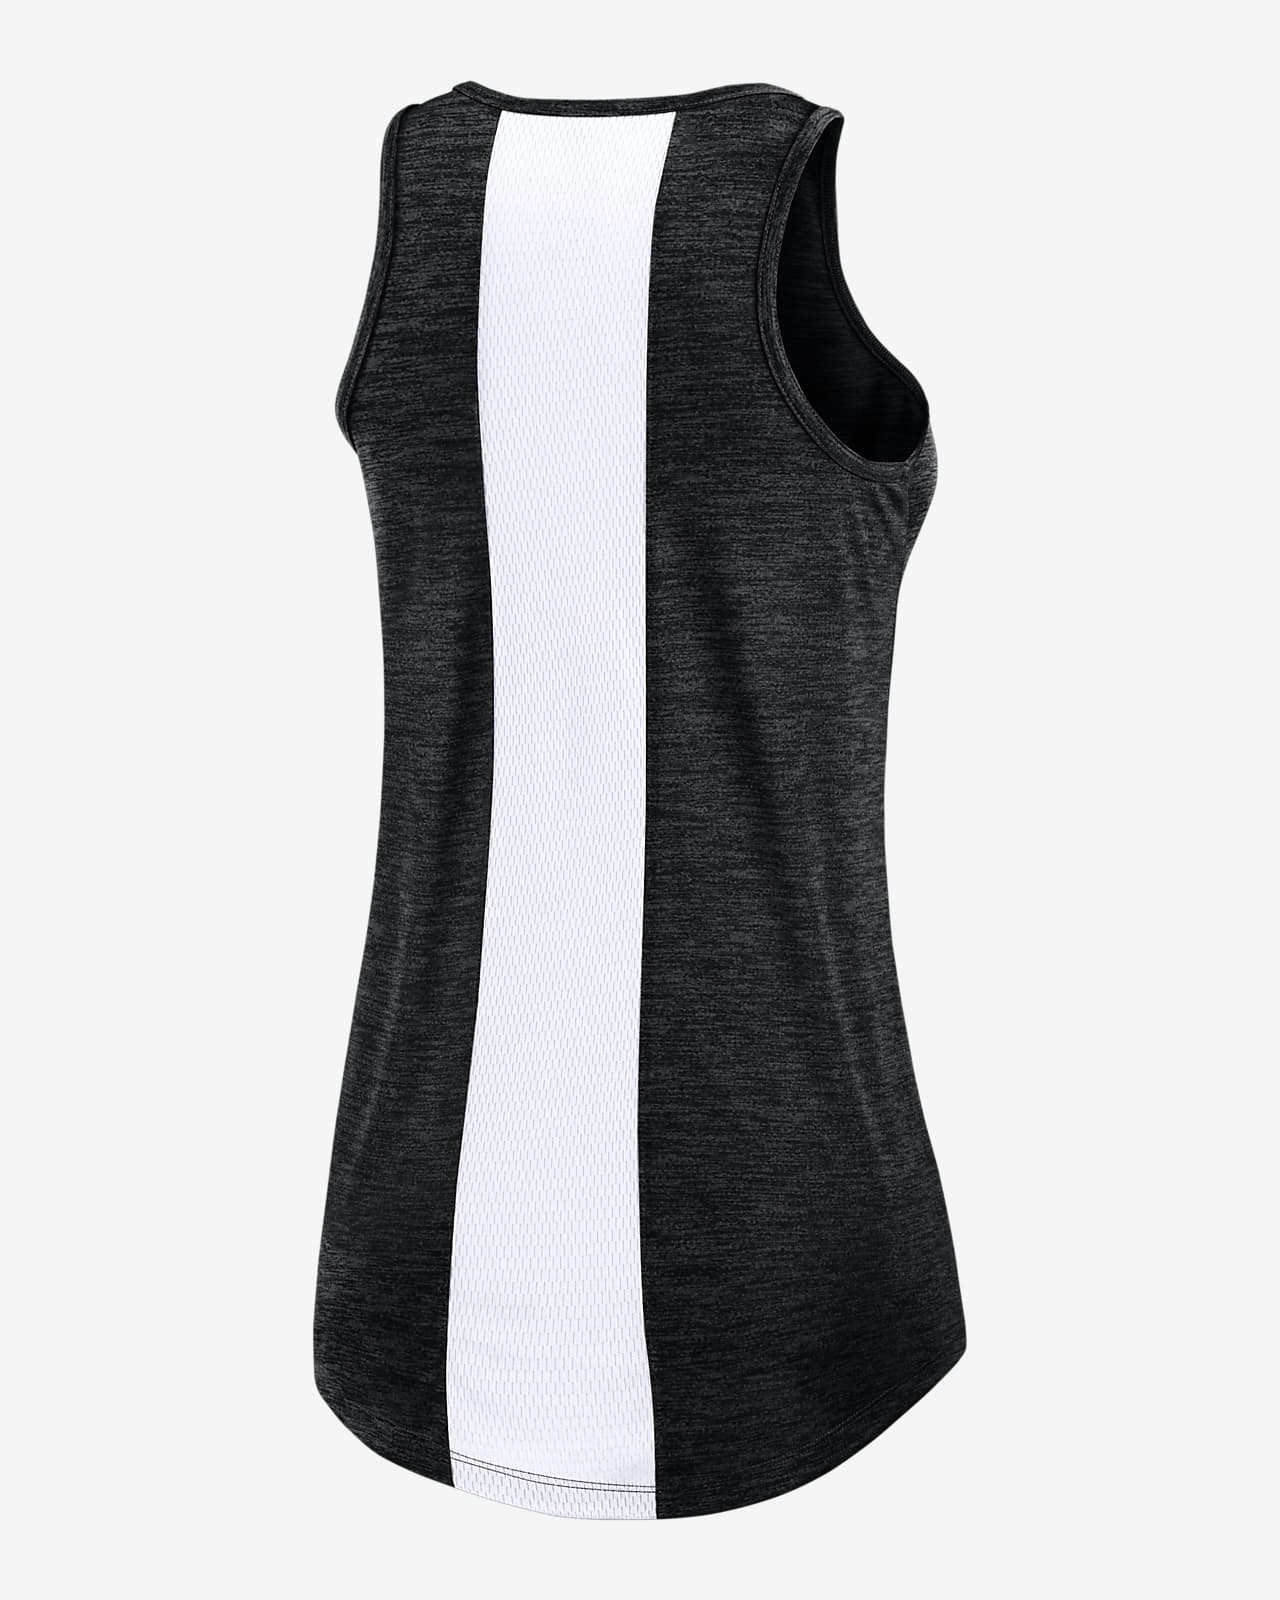 Nike Dri-FIT Right Mix (MLB Chicago White Sox) Women's High-Neck Tank Top.